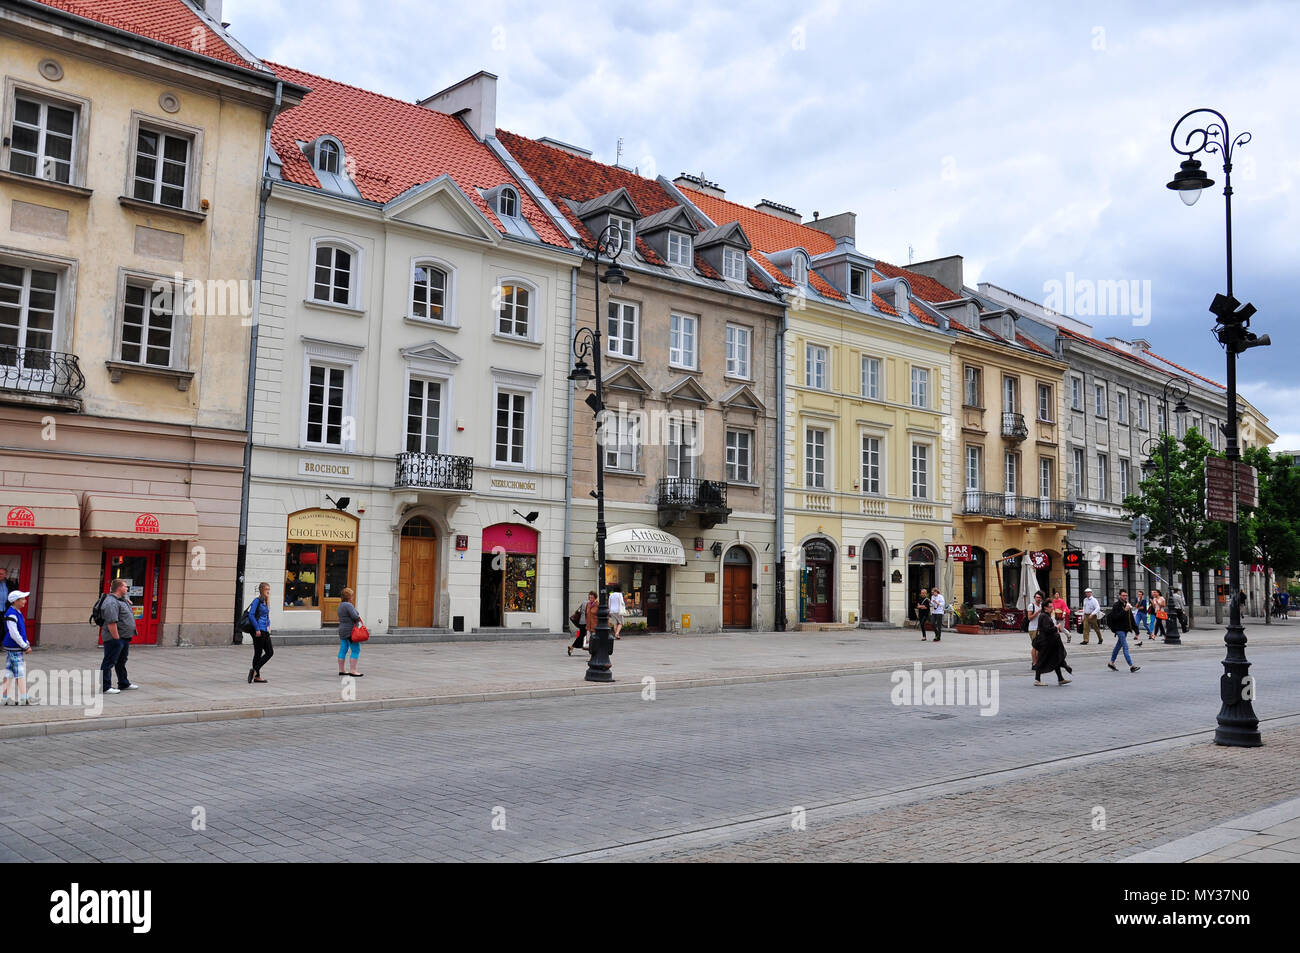 WARSAW, POLAND - JUNE 13: People goes by the shopping street in Warsaw city, Poland on June 13, 2014. Stock Photo